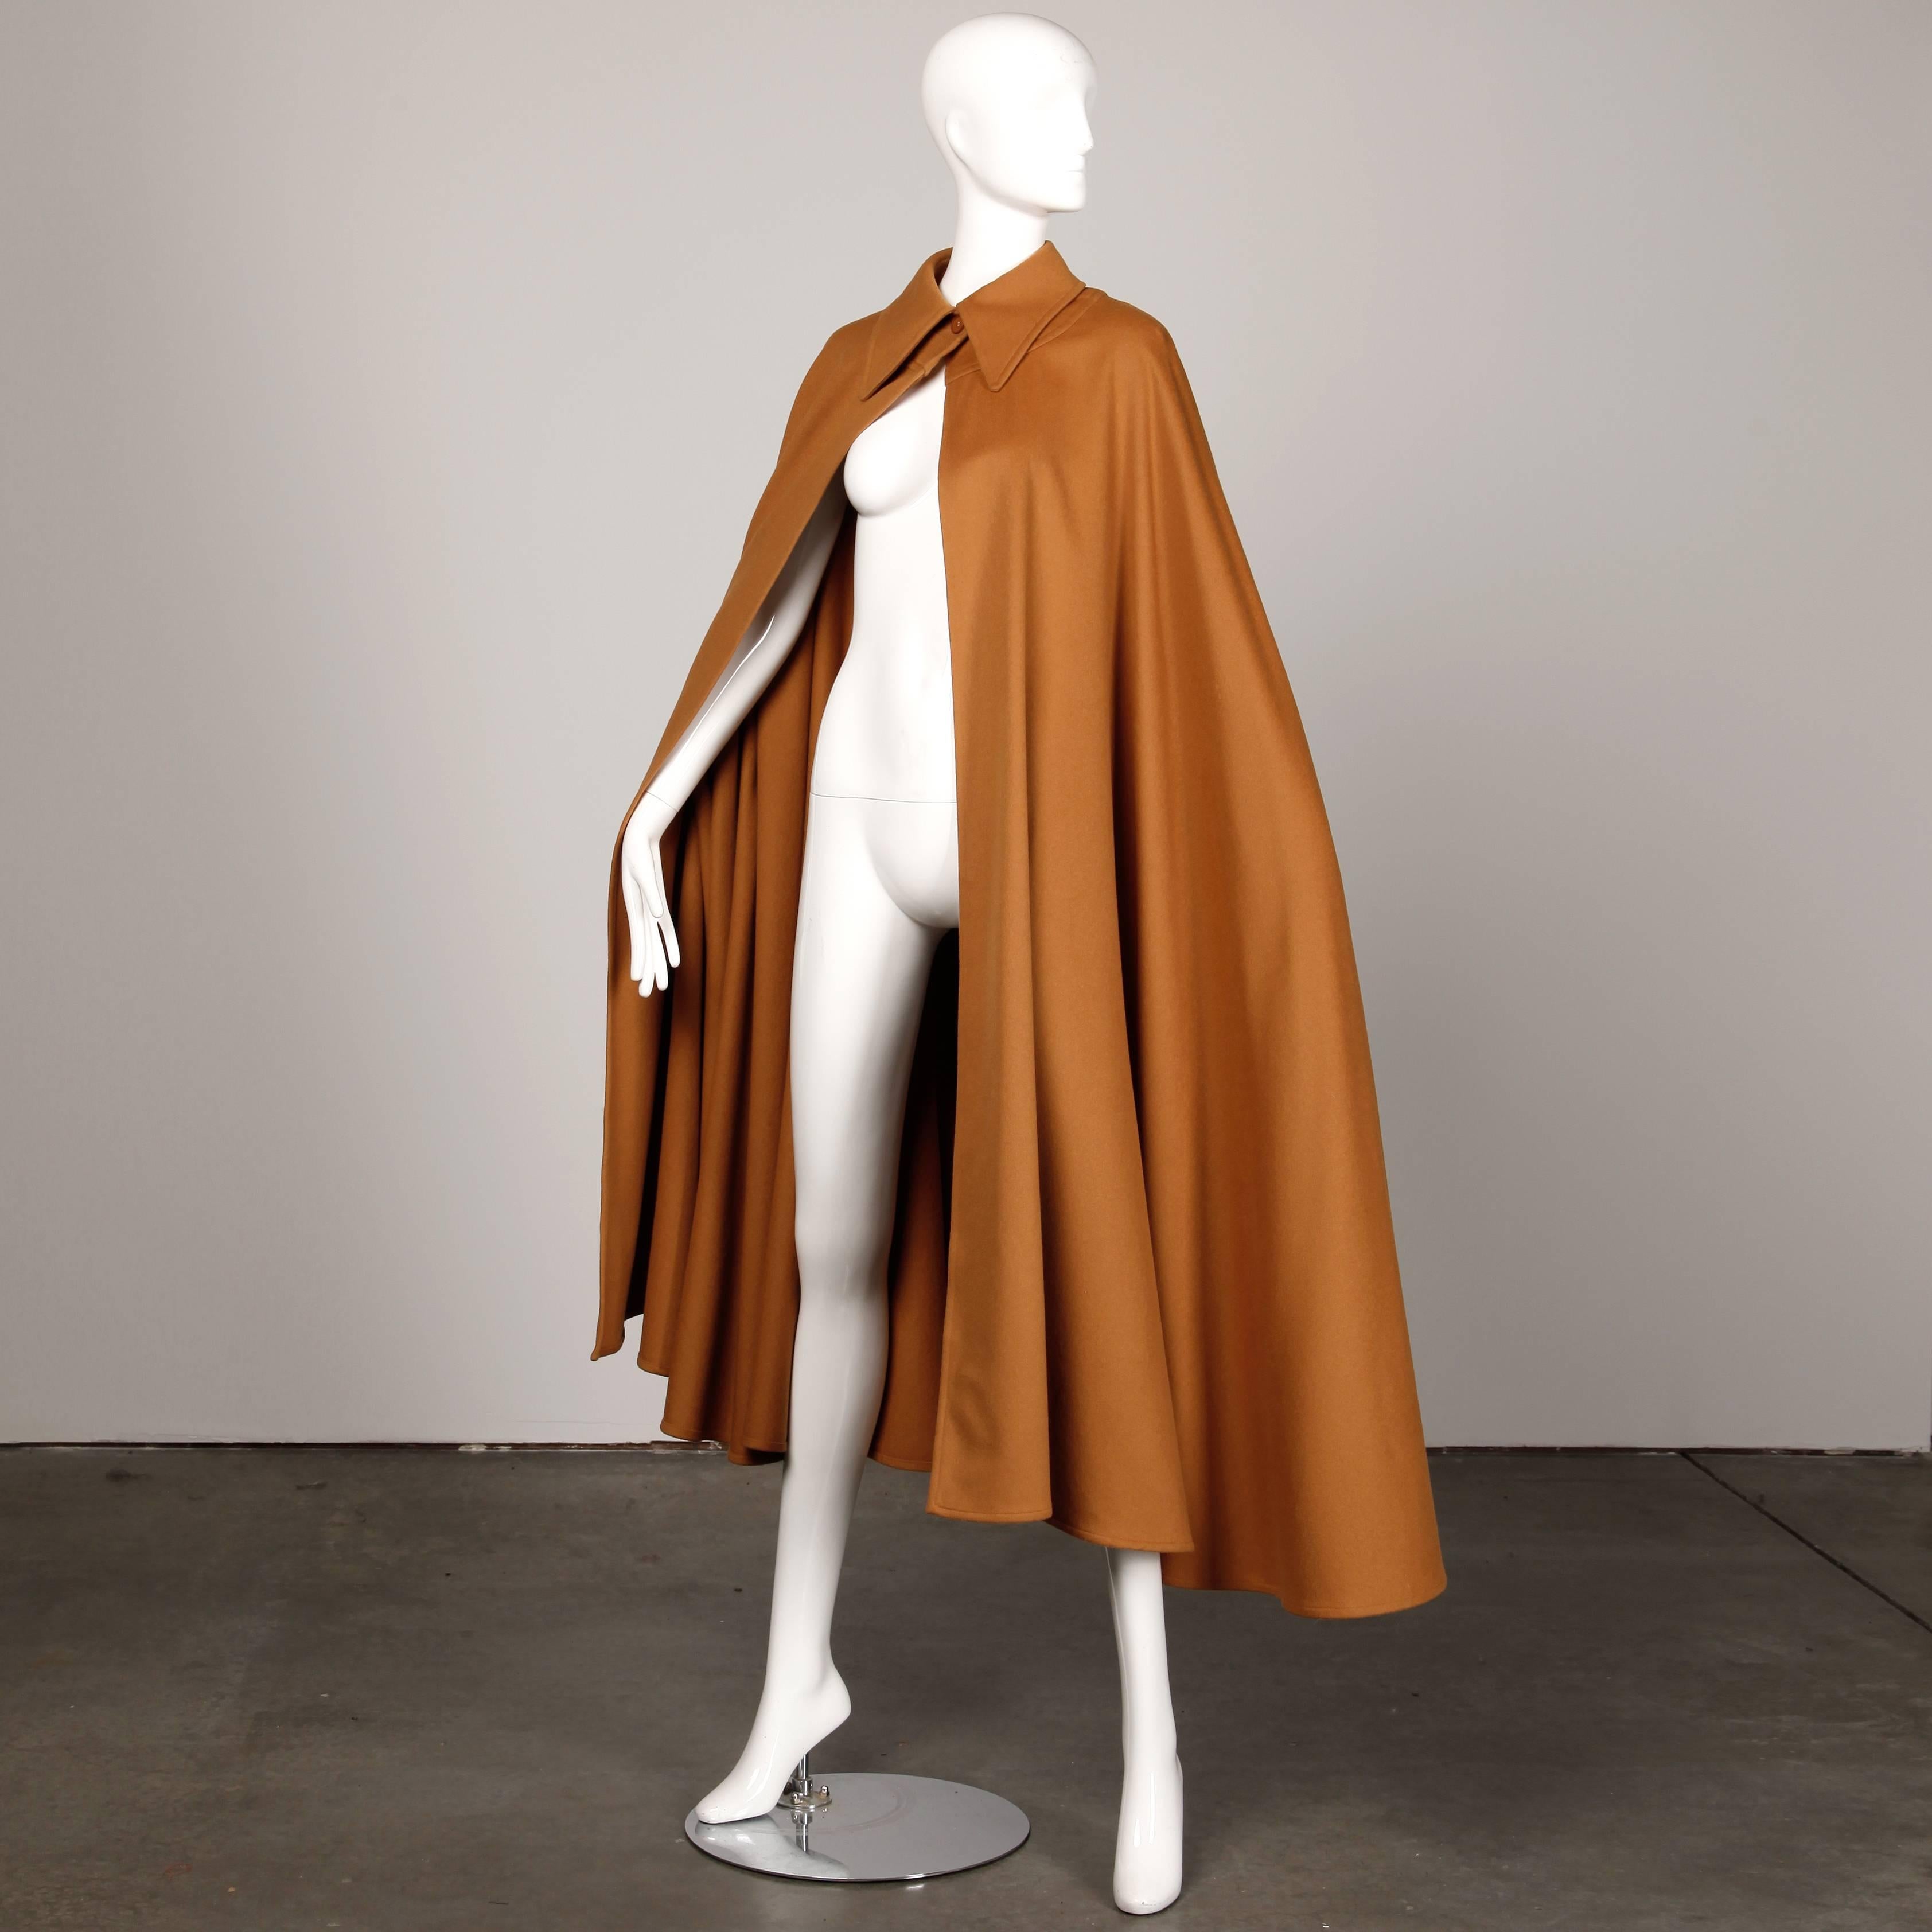 Incredible vintage heavy wool cape coat by Emanuel Ungaro from the 1970s. Single button closure at the front of the neck. Beautiful camel colored wool. Unlined. This cape should fit most size on account of its free shape. The total length measures